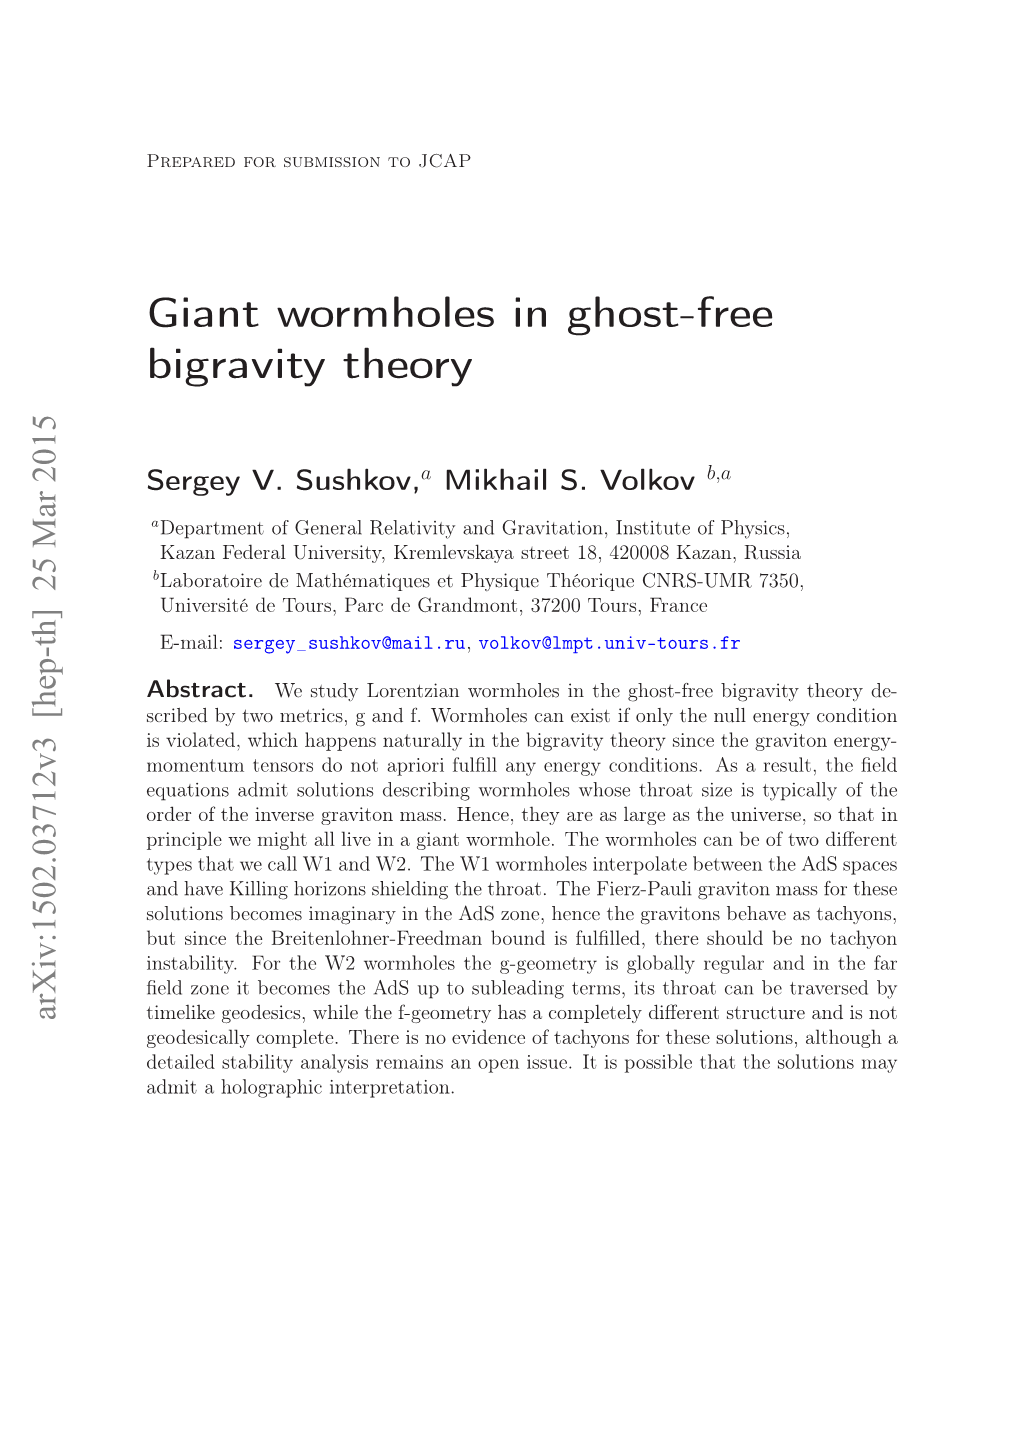 Giant Wormholes in Ghost-Free Bigravity Theory